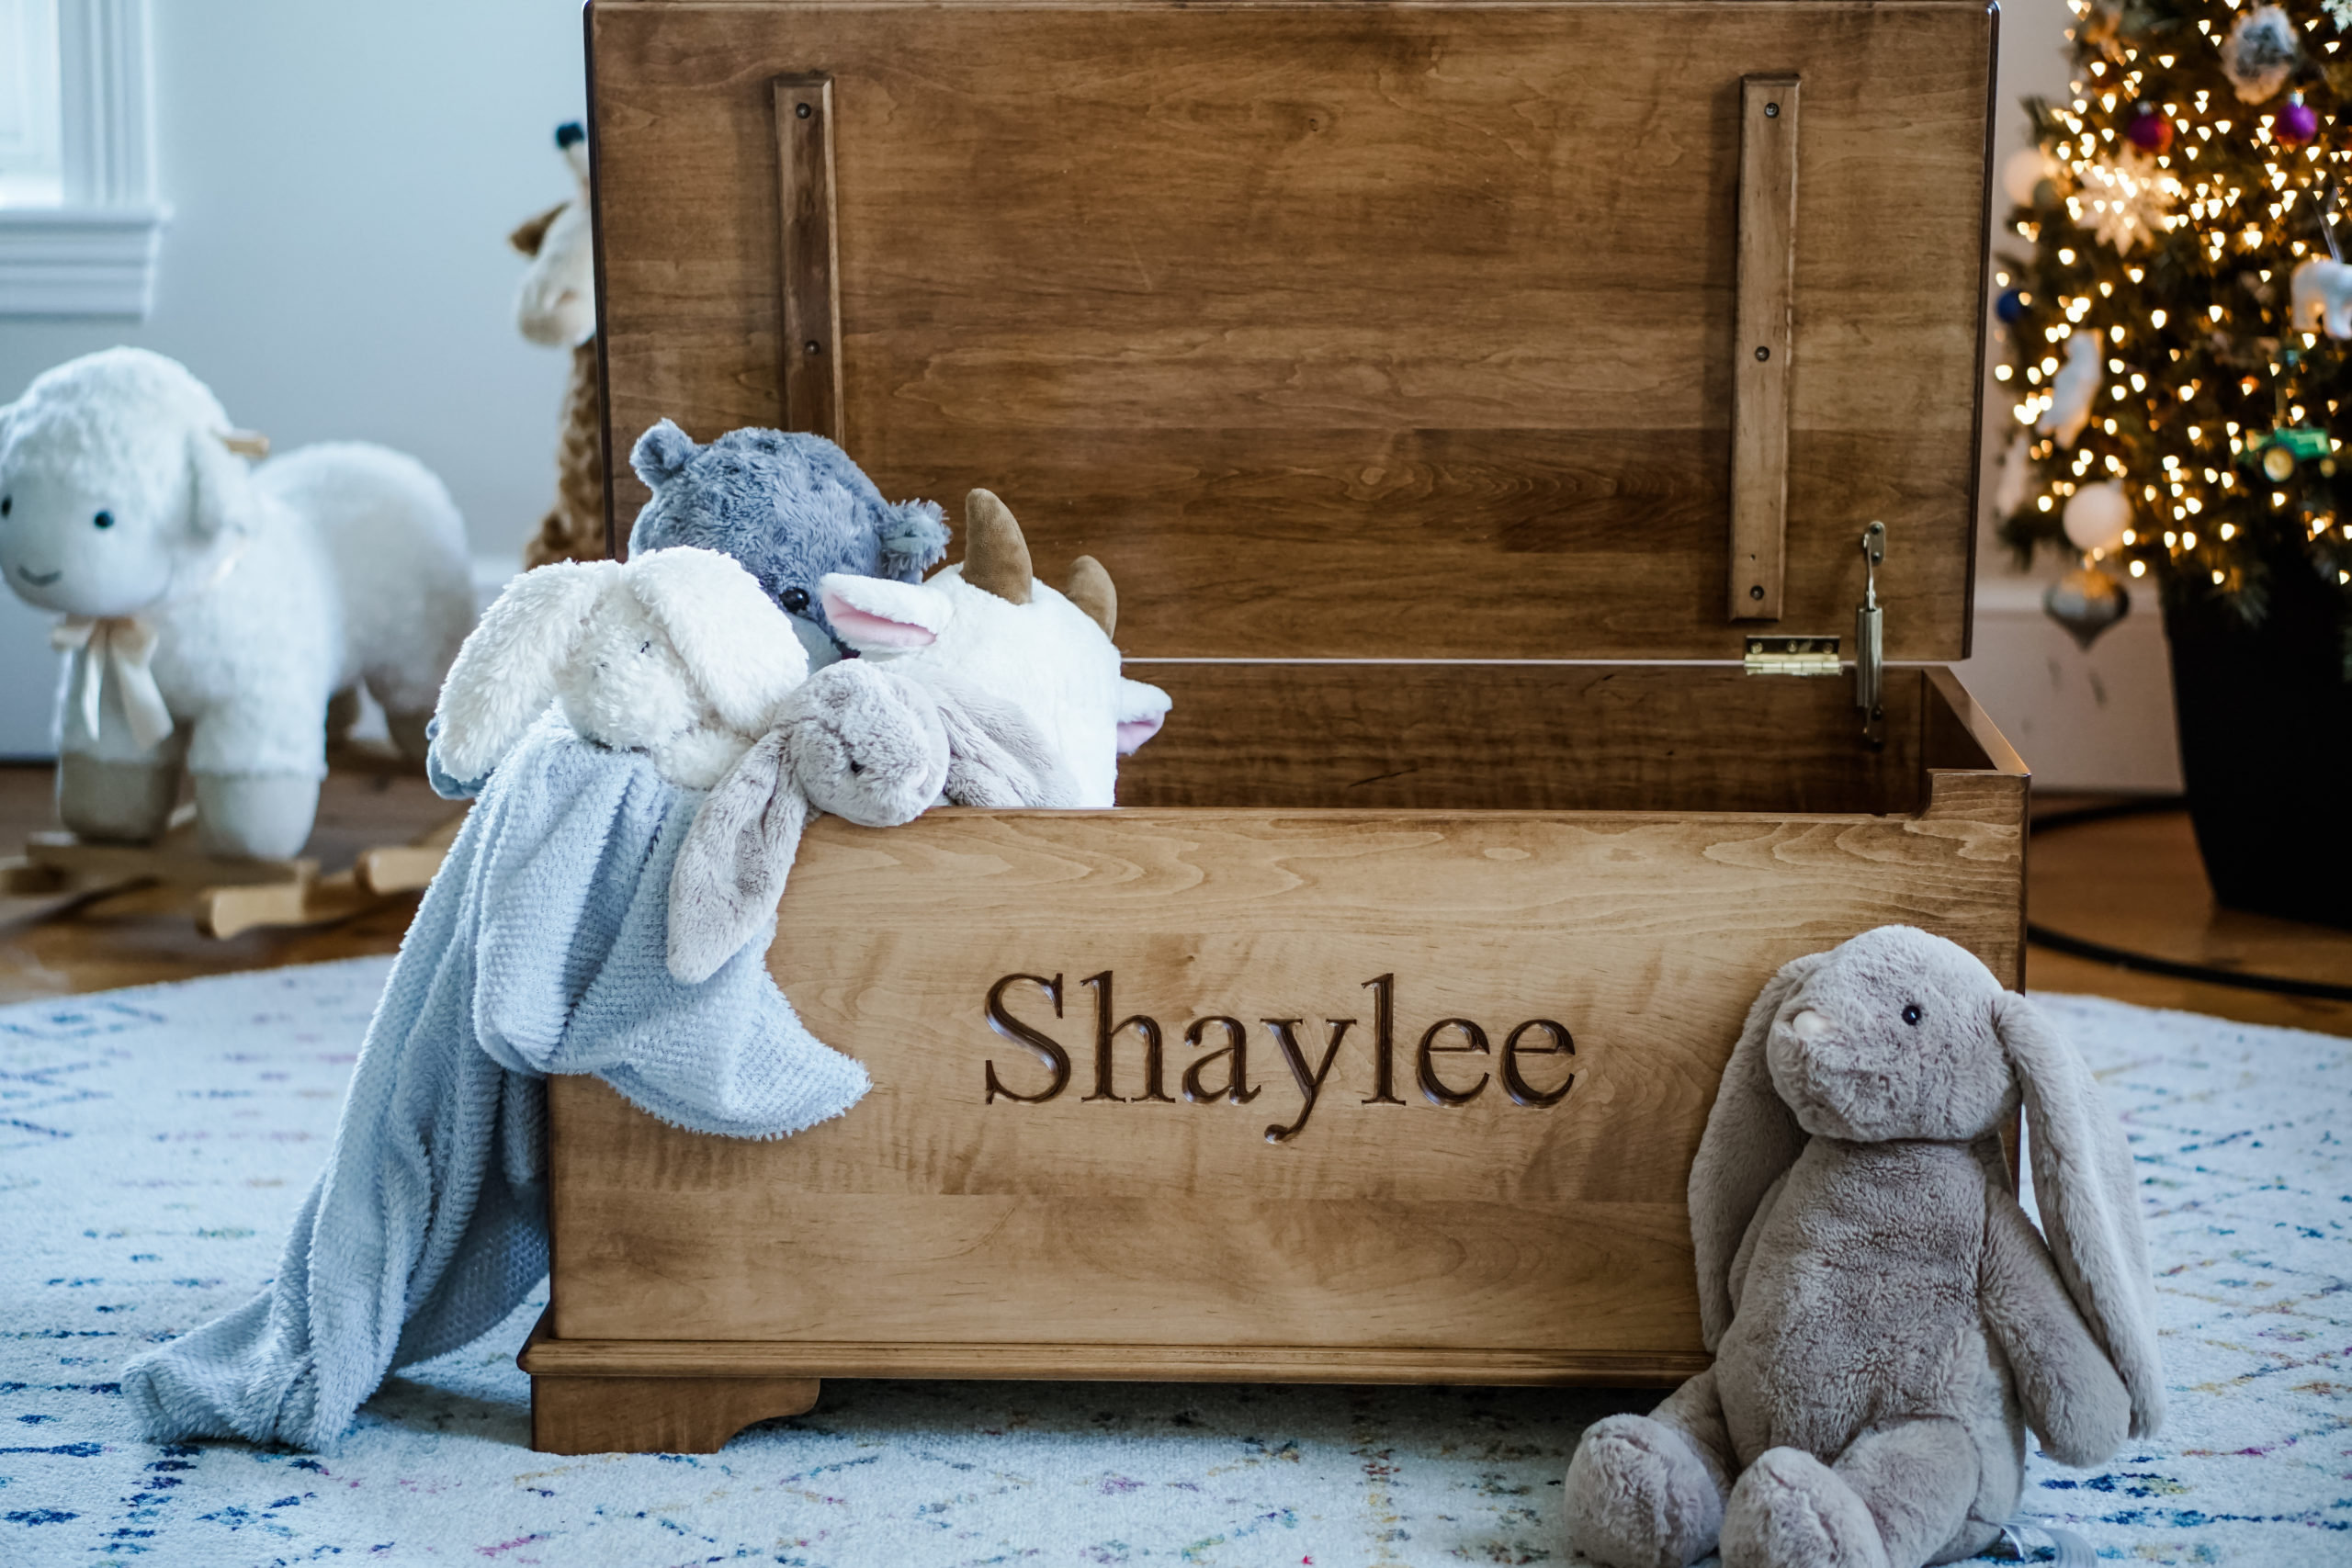 Reclaimed Wood Toy Box Toy Storage Wooden Toy Chest Playroom